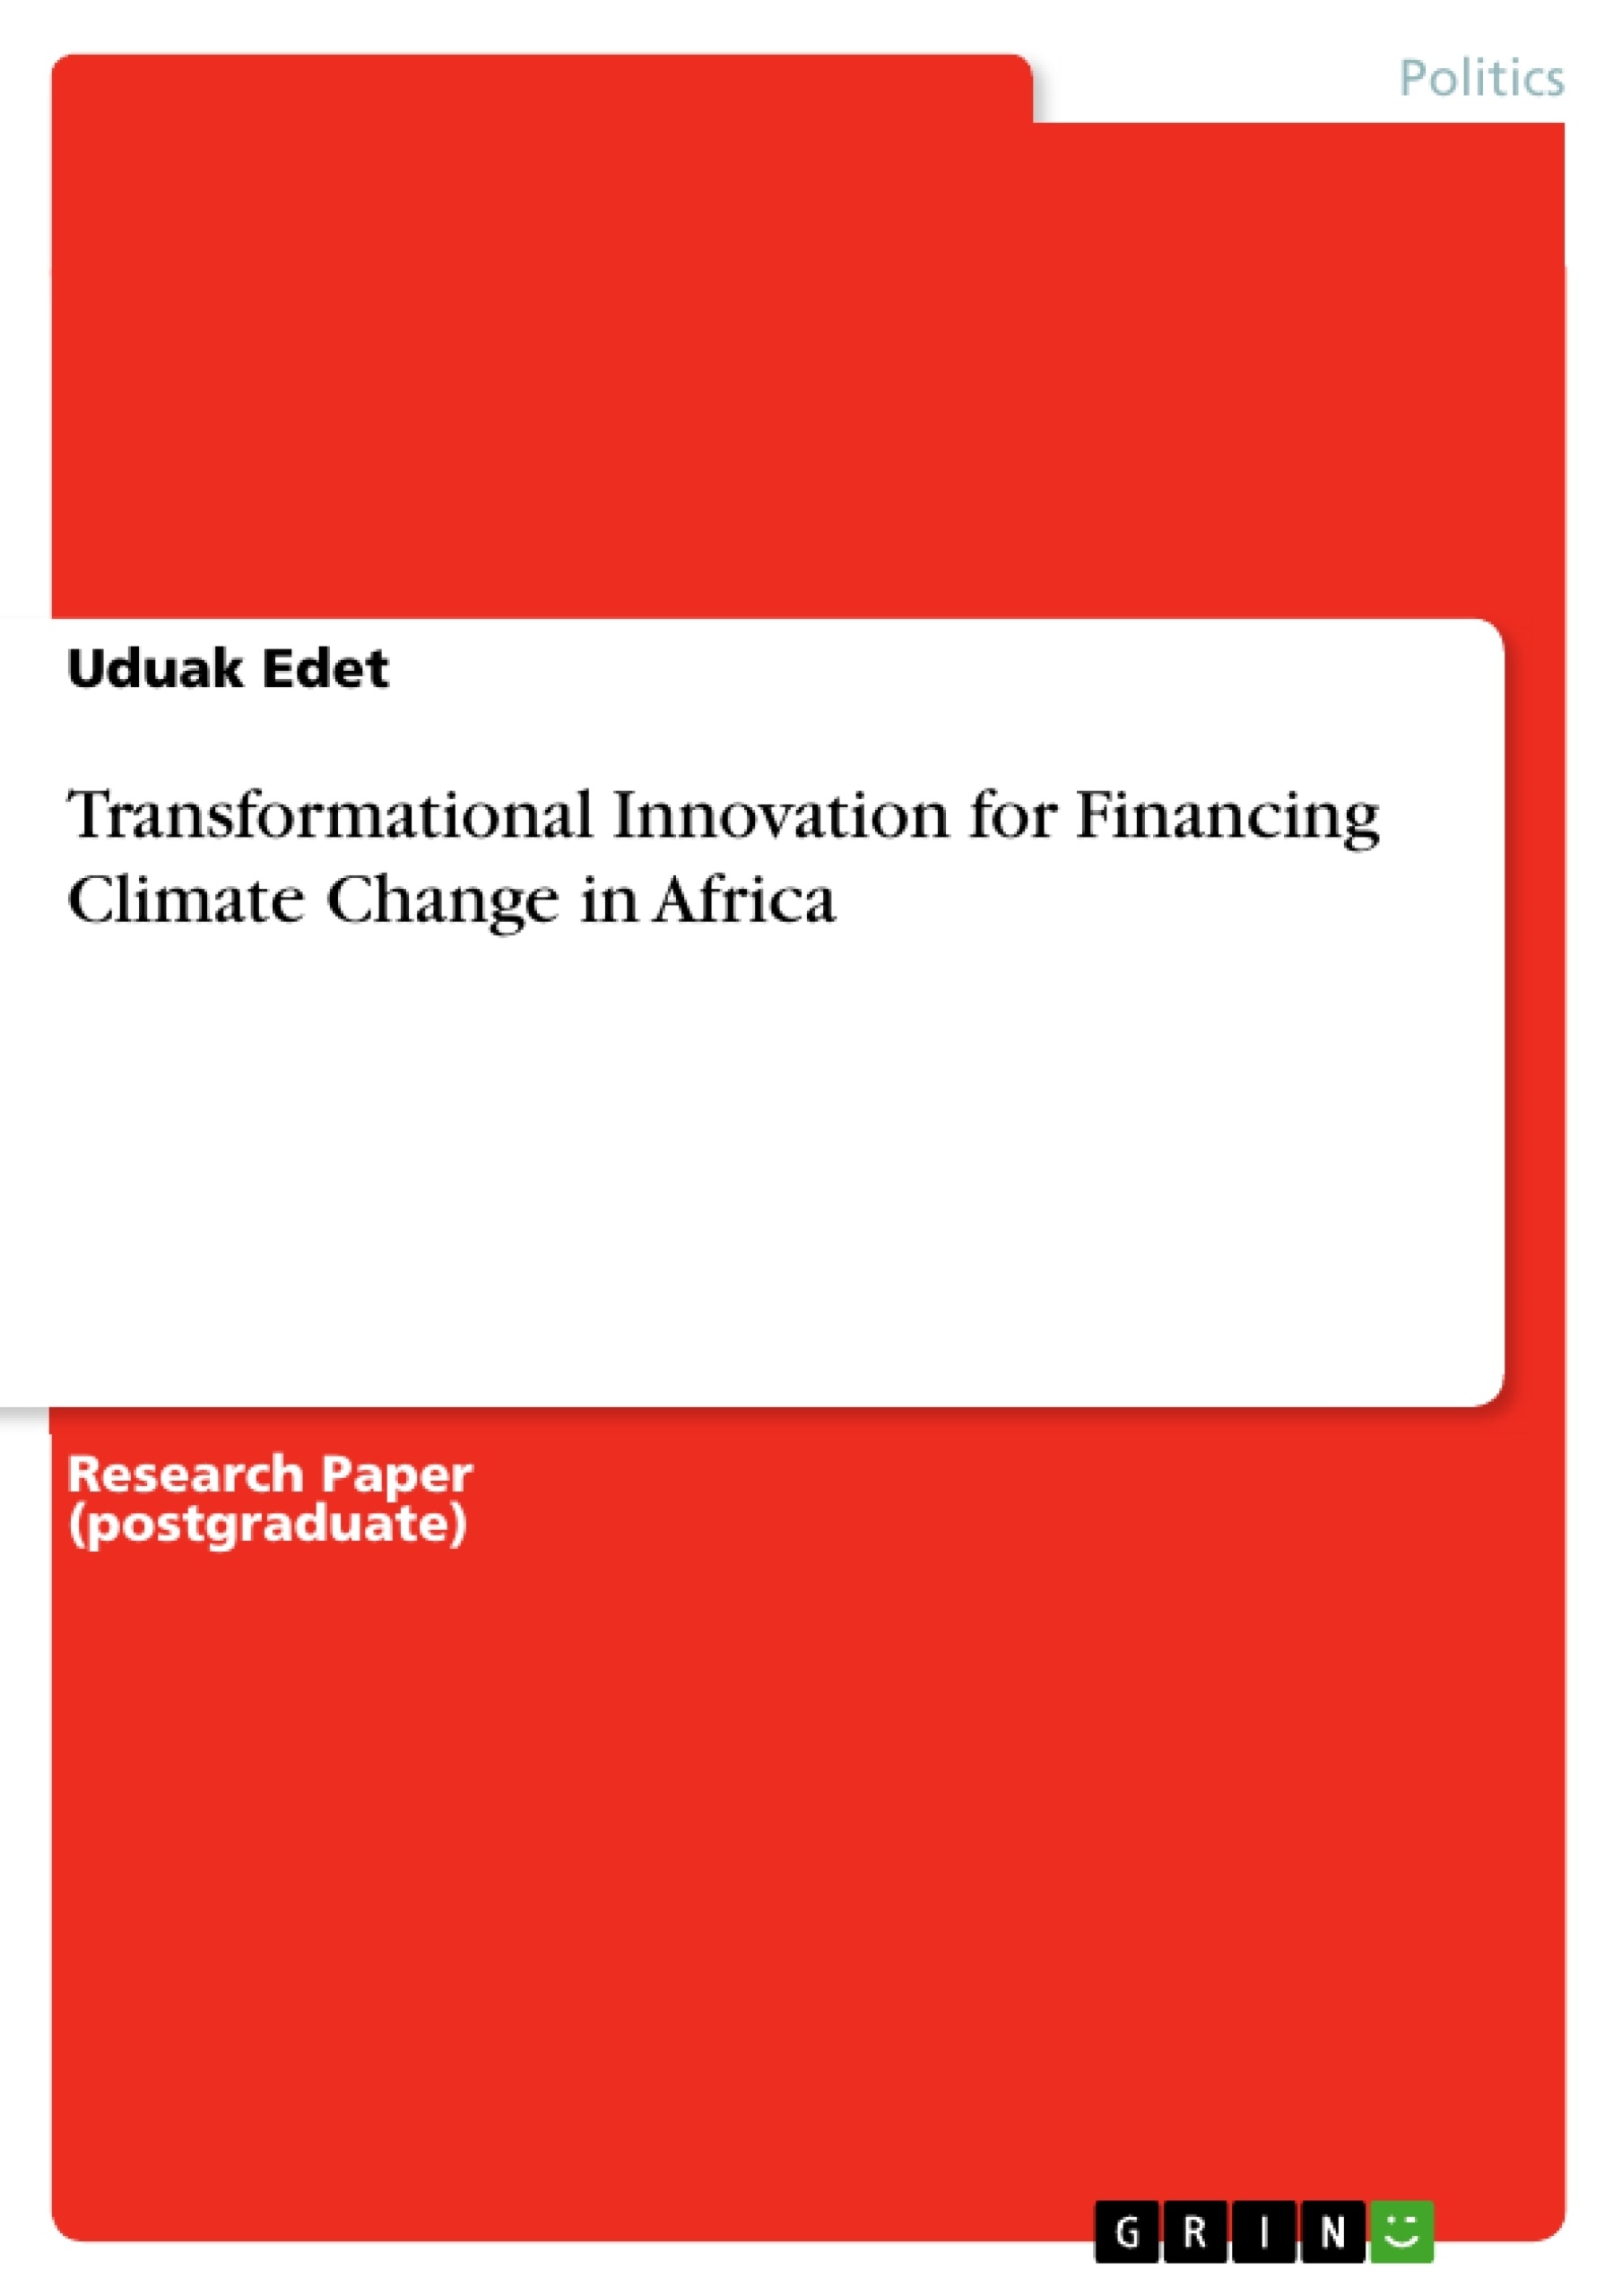 Title: Transformational Innovation for Financing Climate Change in Africa